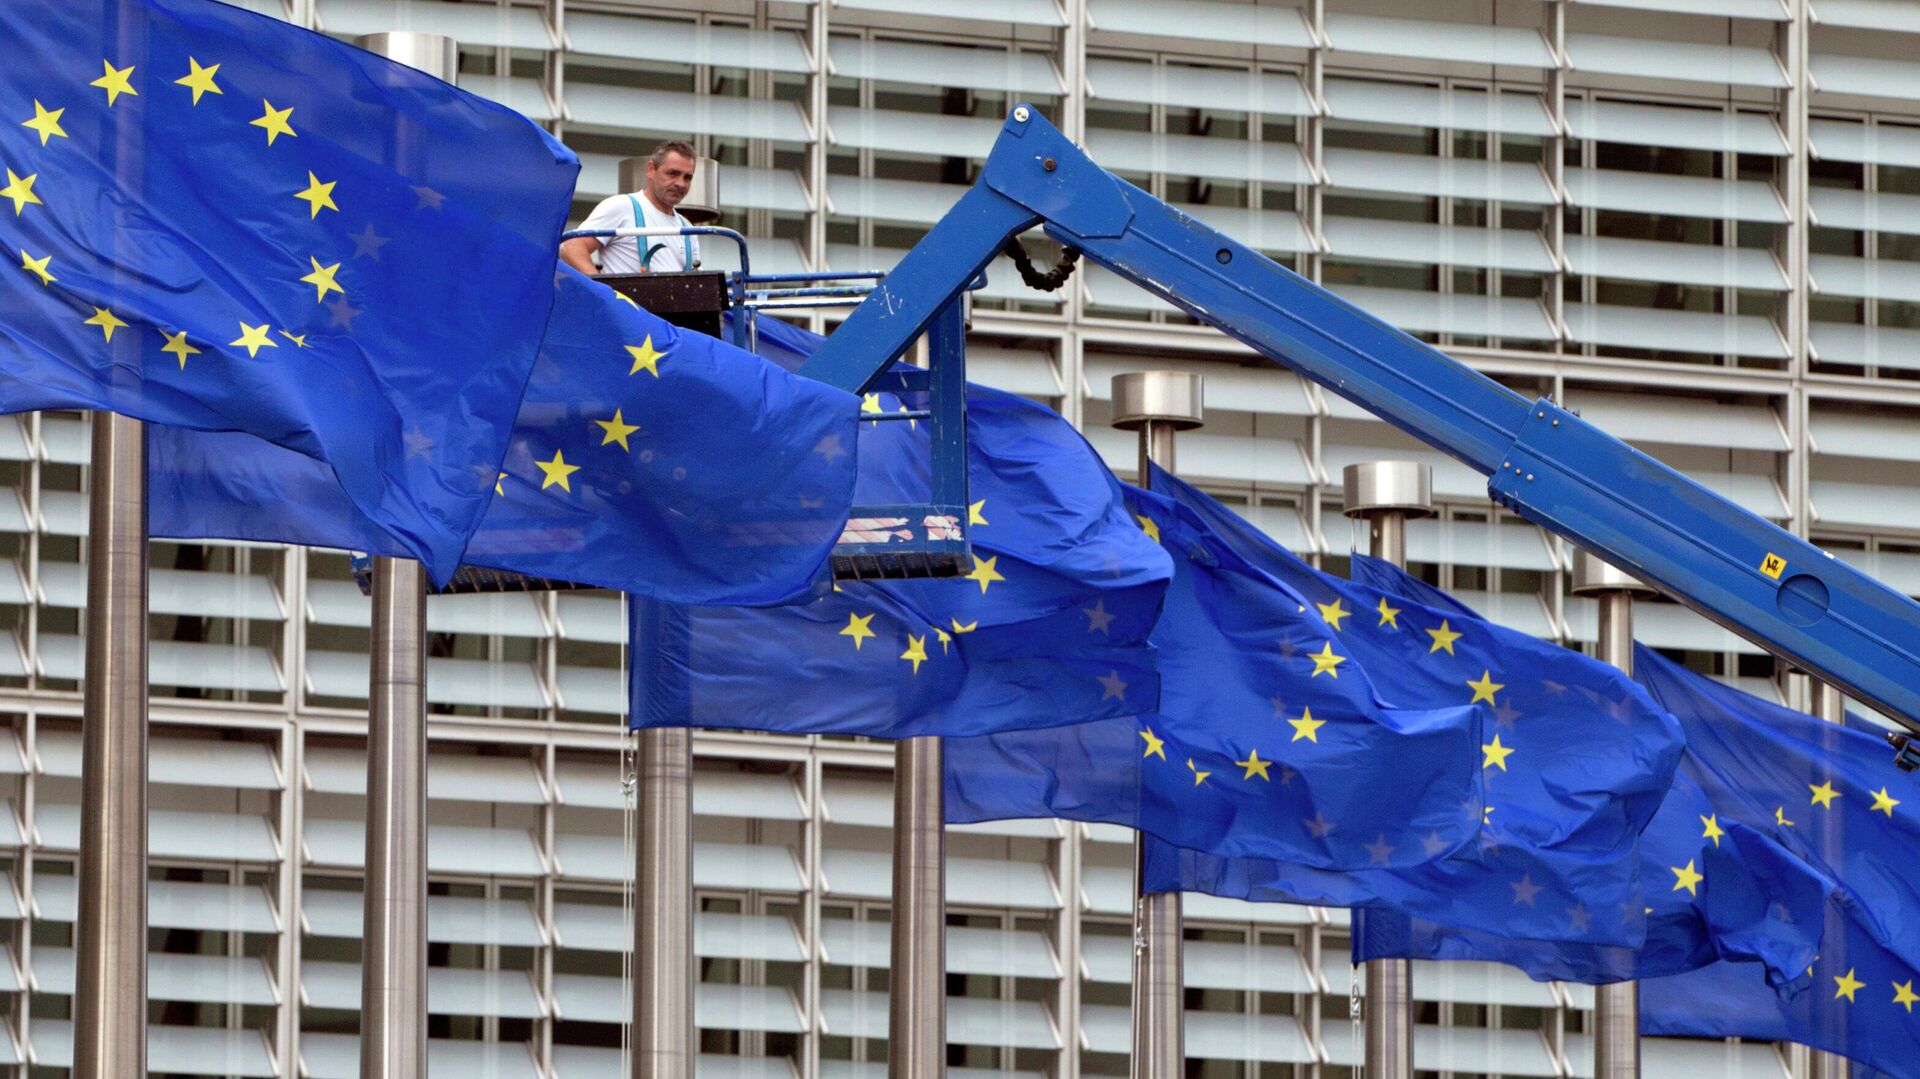 FILE- In this June 23, 2016 file photo, a worker on a lift adjusts the EU flags in front of EU headquarters in Brussels - Sputnik International, 1920, 23.03.2023